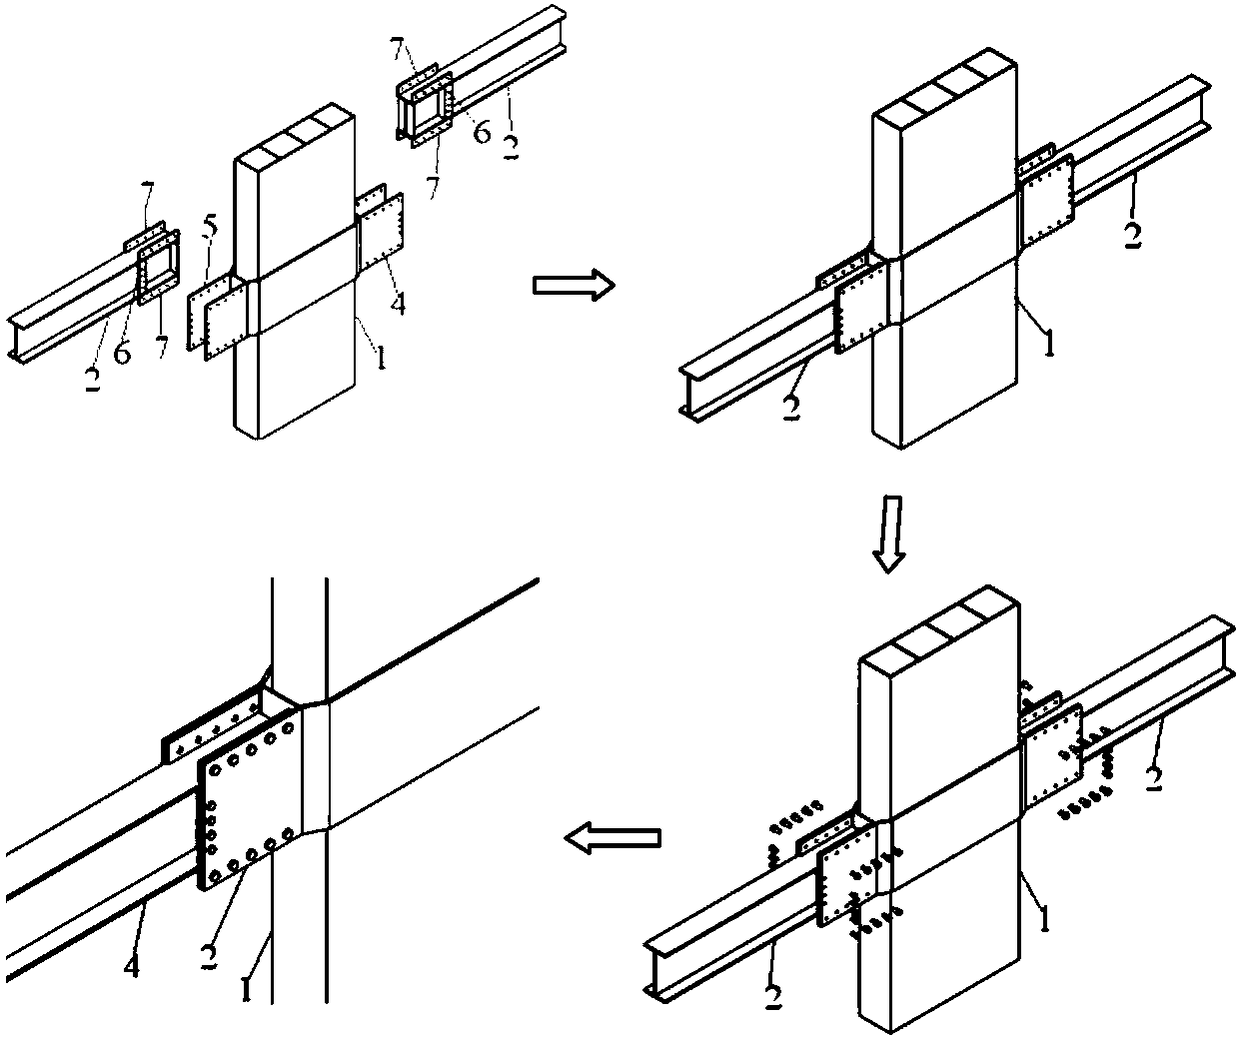 A double-sided plate bolt joint and assembly method for beams and columns